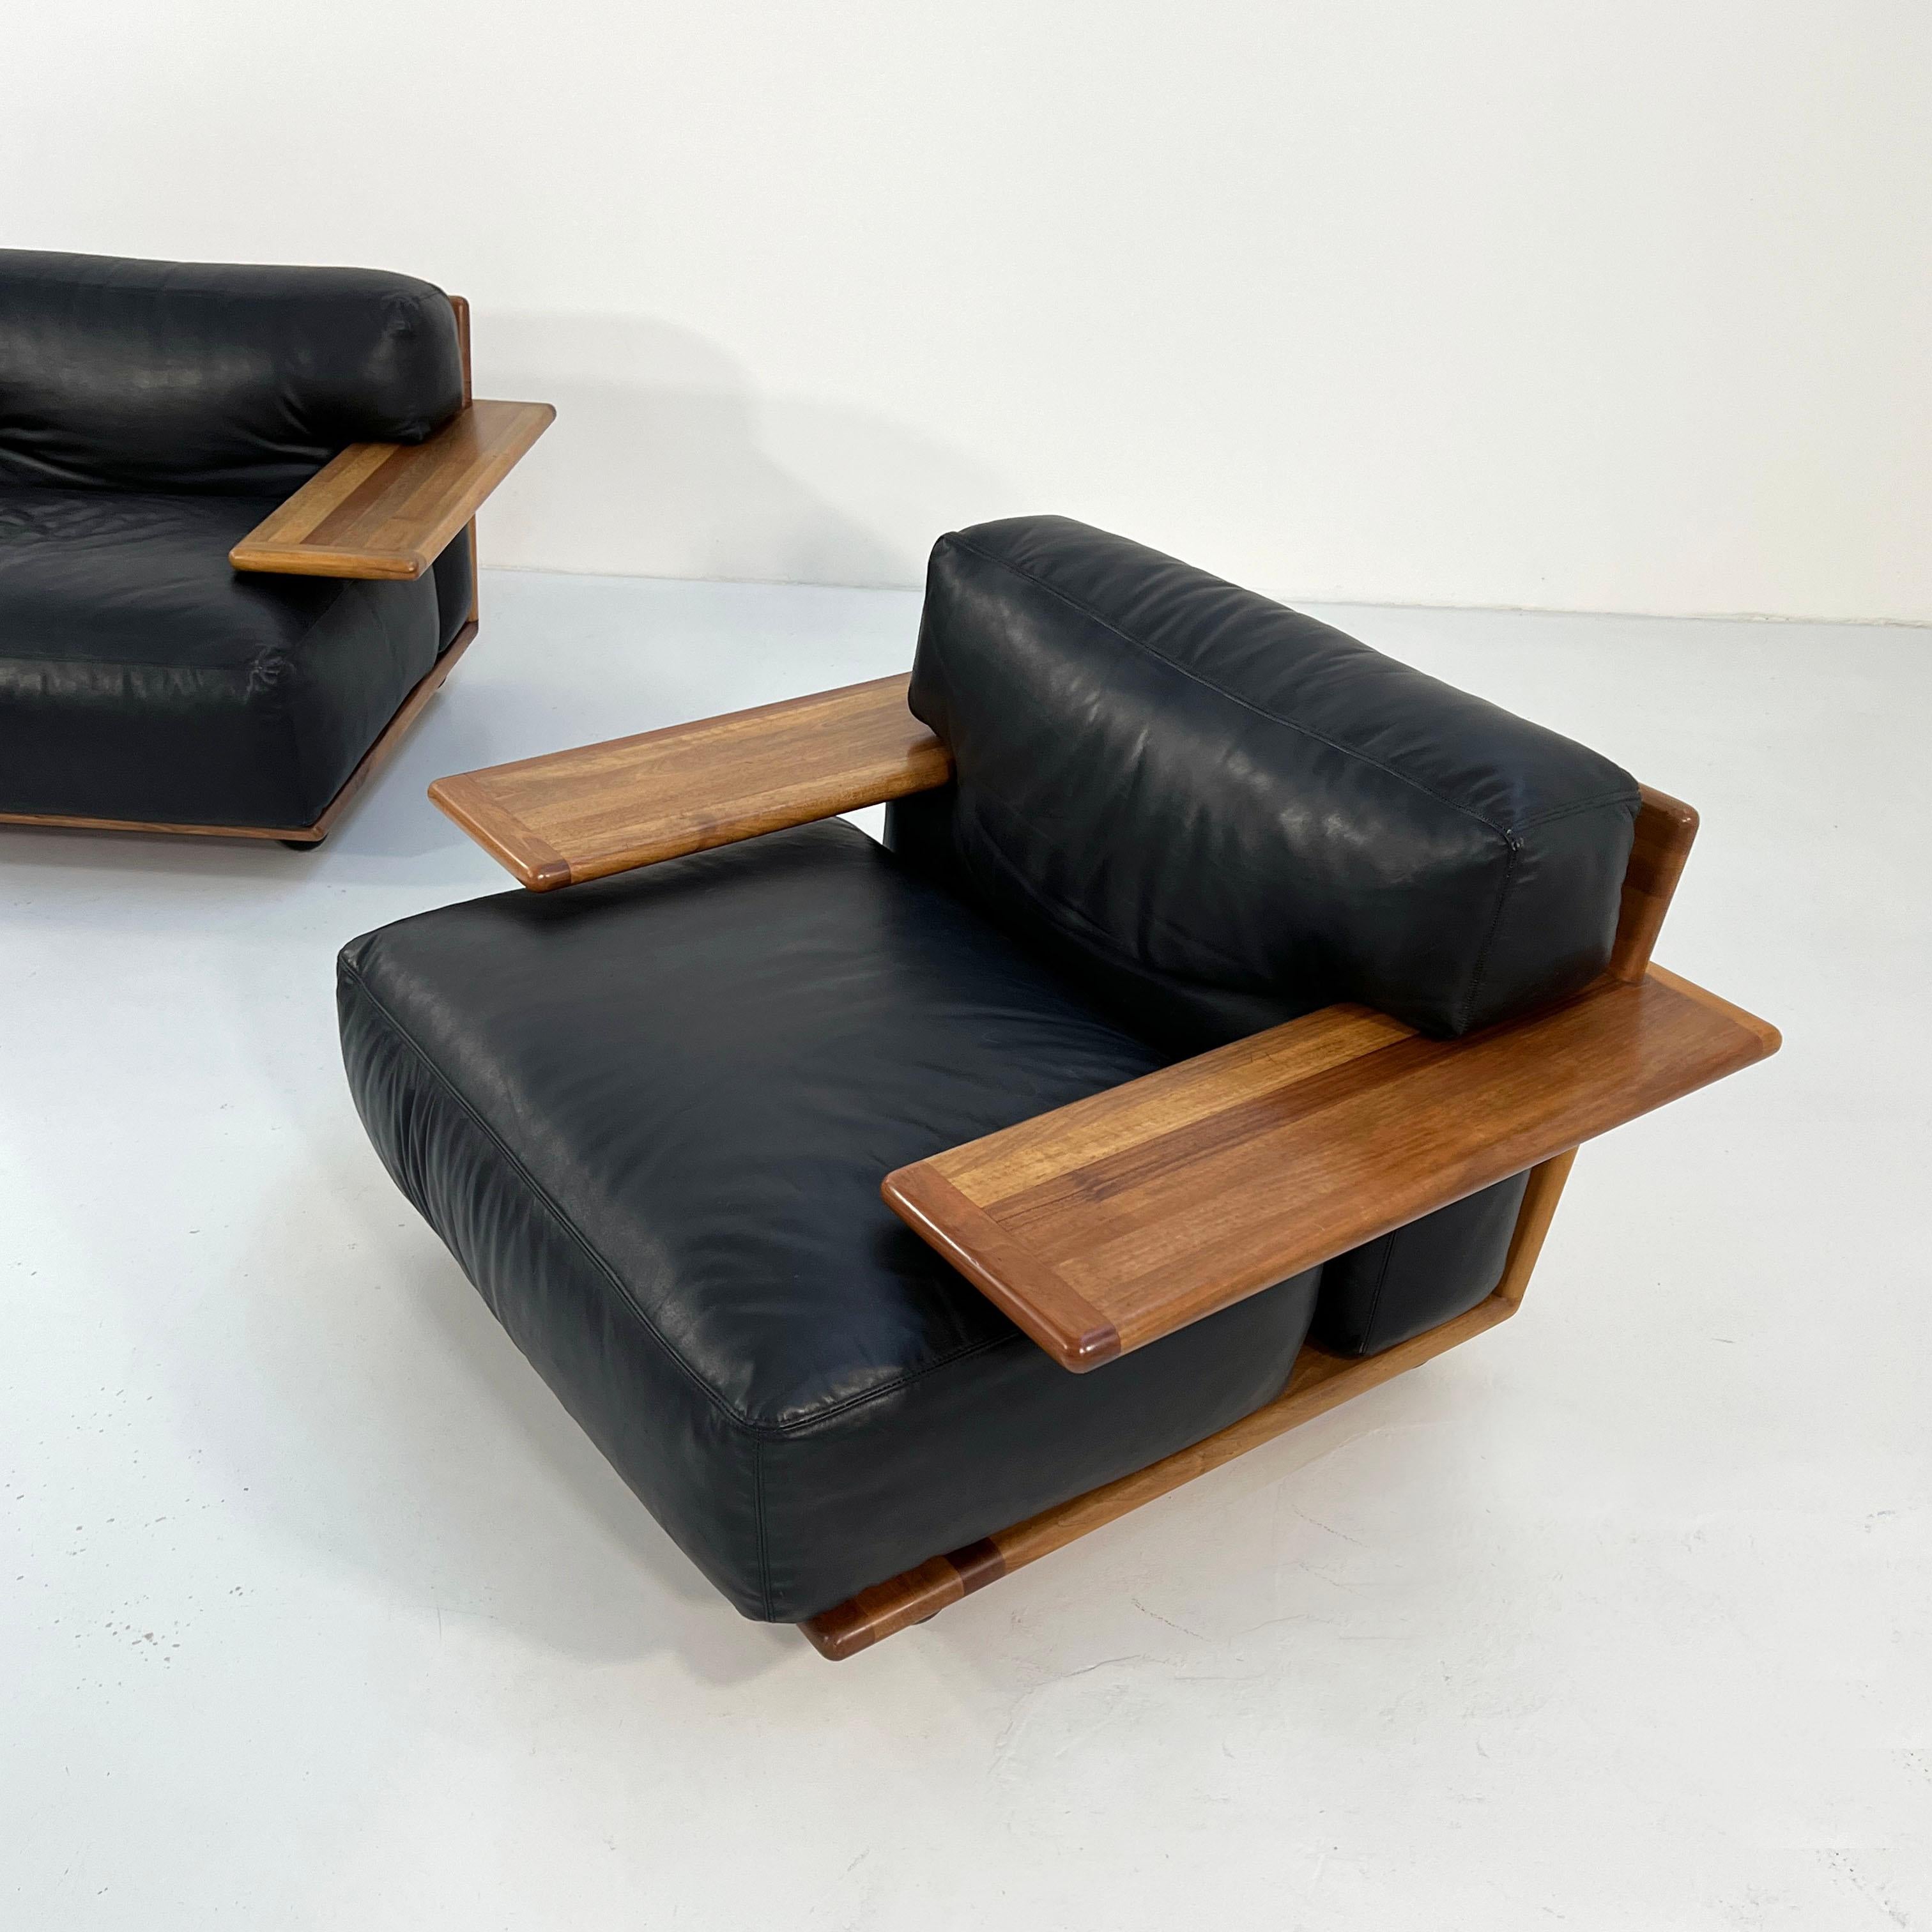 Pianura Armchair in Black Leather by Mario Bellini for Cassina, 1970s For Sale 7